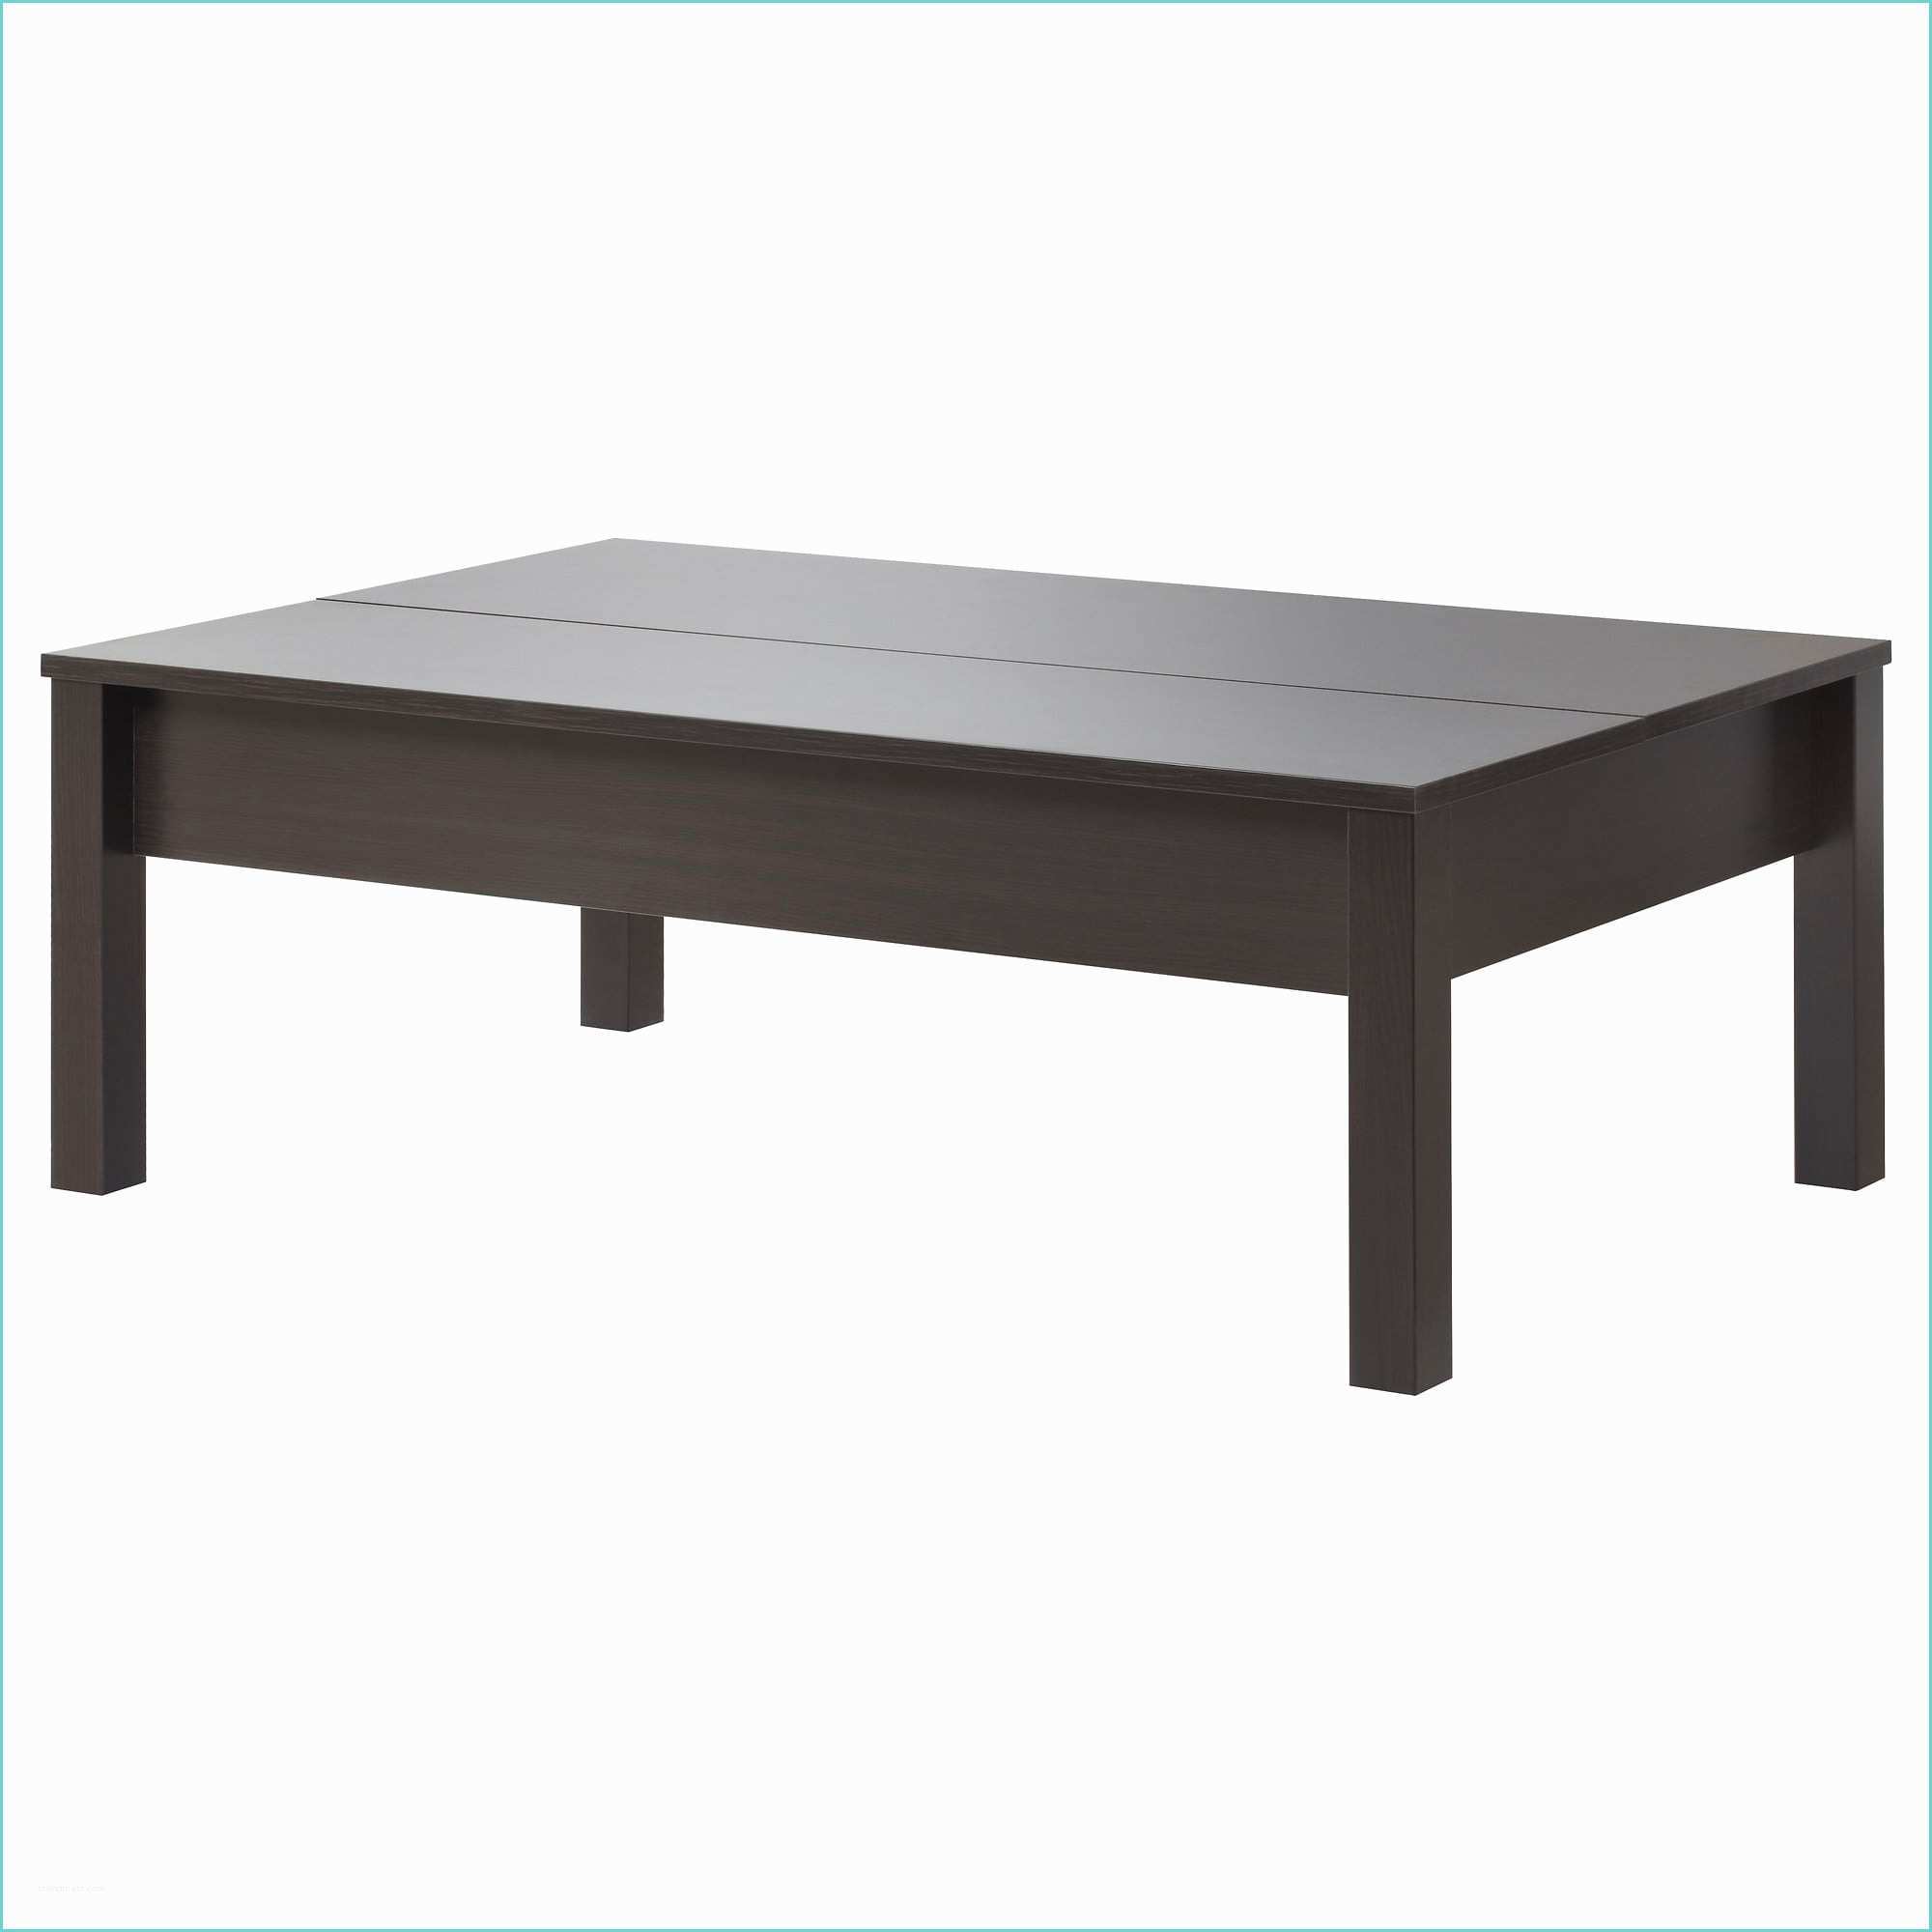 Table Basse Roulette Ikea Table Roulette Ikea Good Trofast Ikea Hack with Table